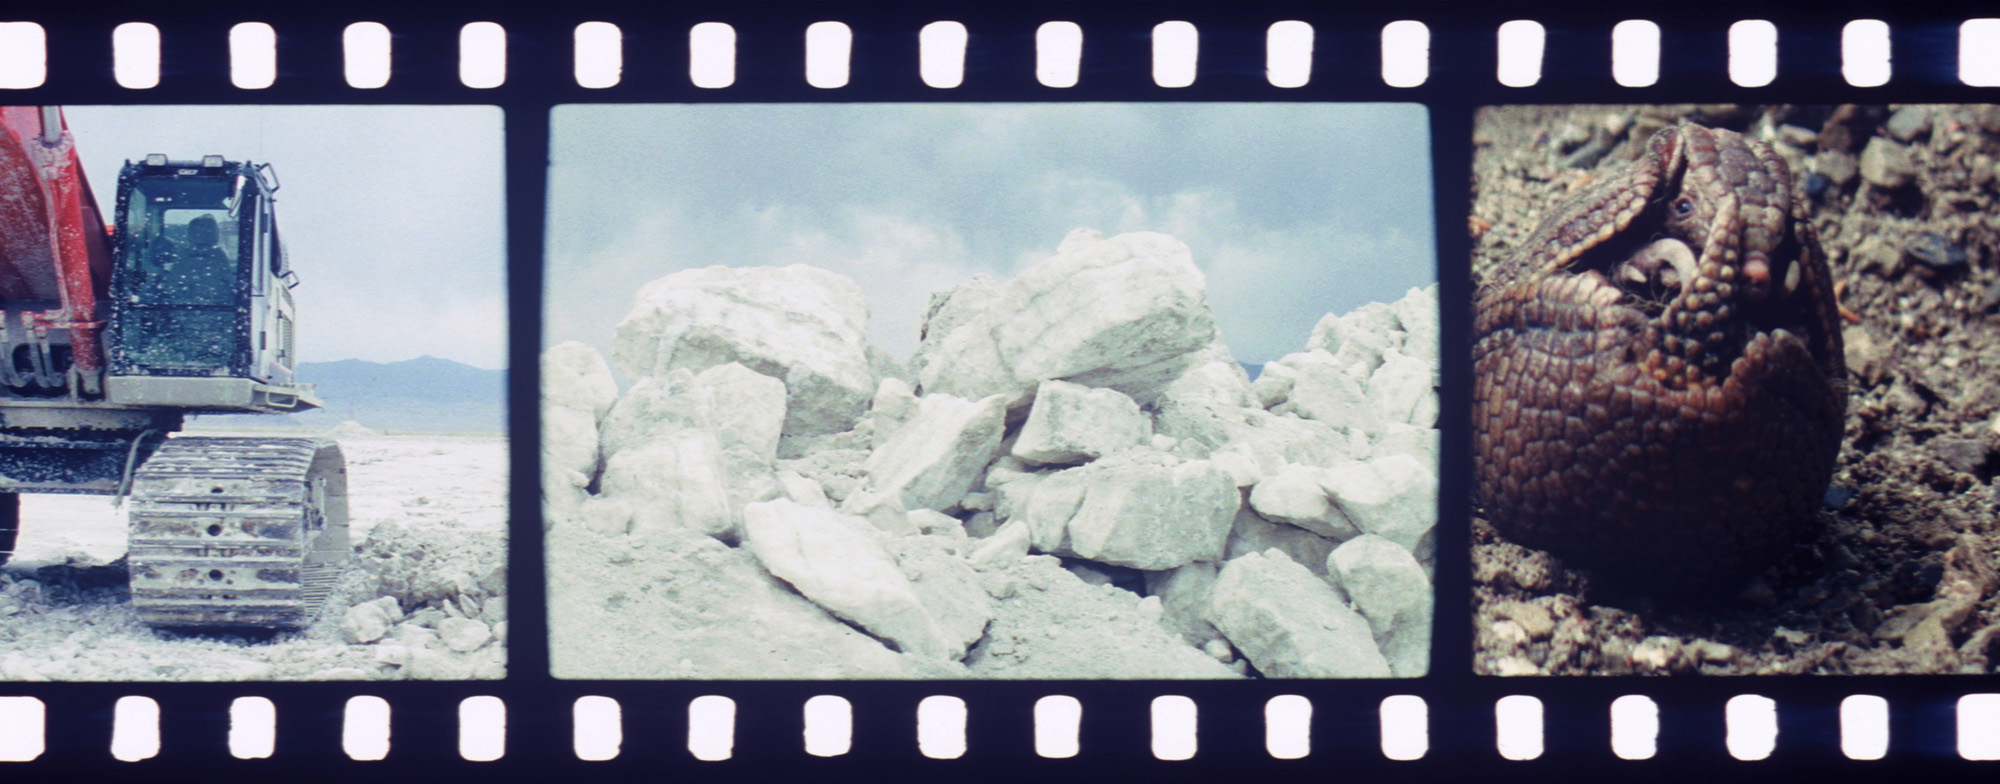 Tacita Dean, <em>JG</em>, 2013. Anamorphic 35mm film, color and black and white, optical sound. 26 1/2 min. Courtesy of the artist and Marian Goodman Gallery, New York/Paris, and Frith Street Gallery, London.